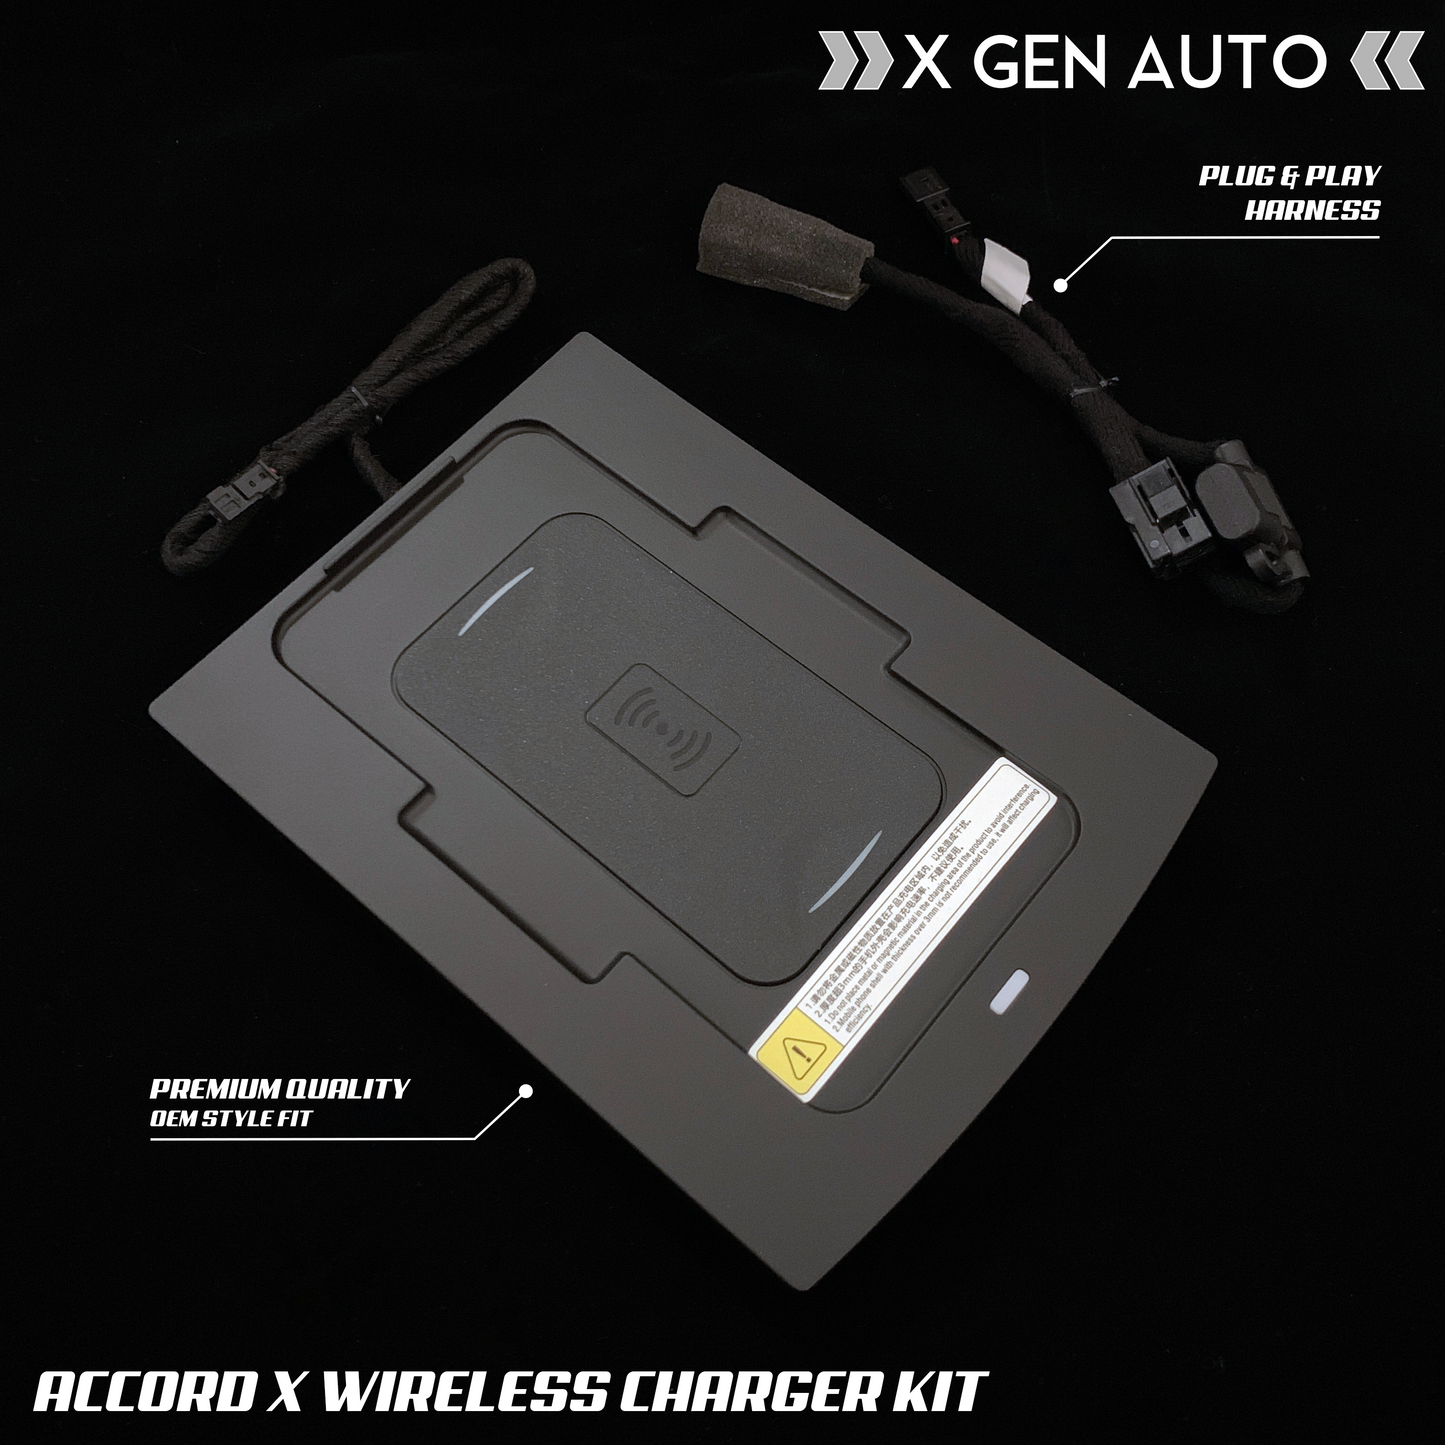 [ACCORD X] WIRELESS CHARGER KIT